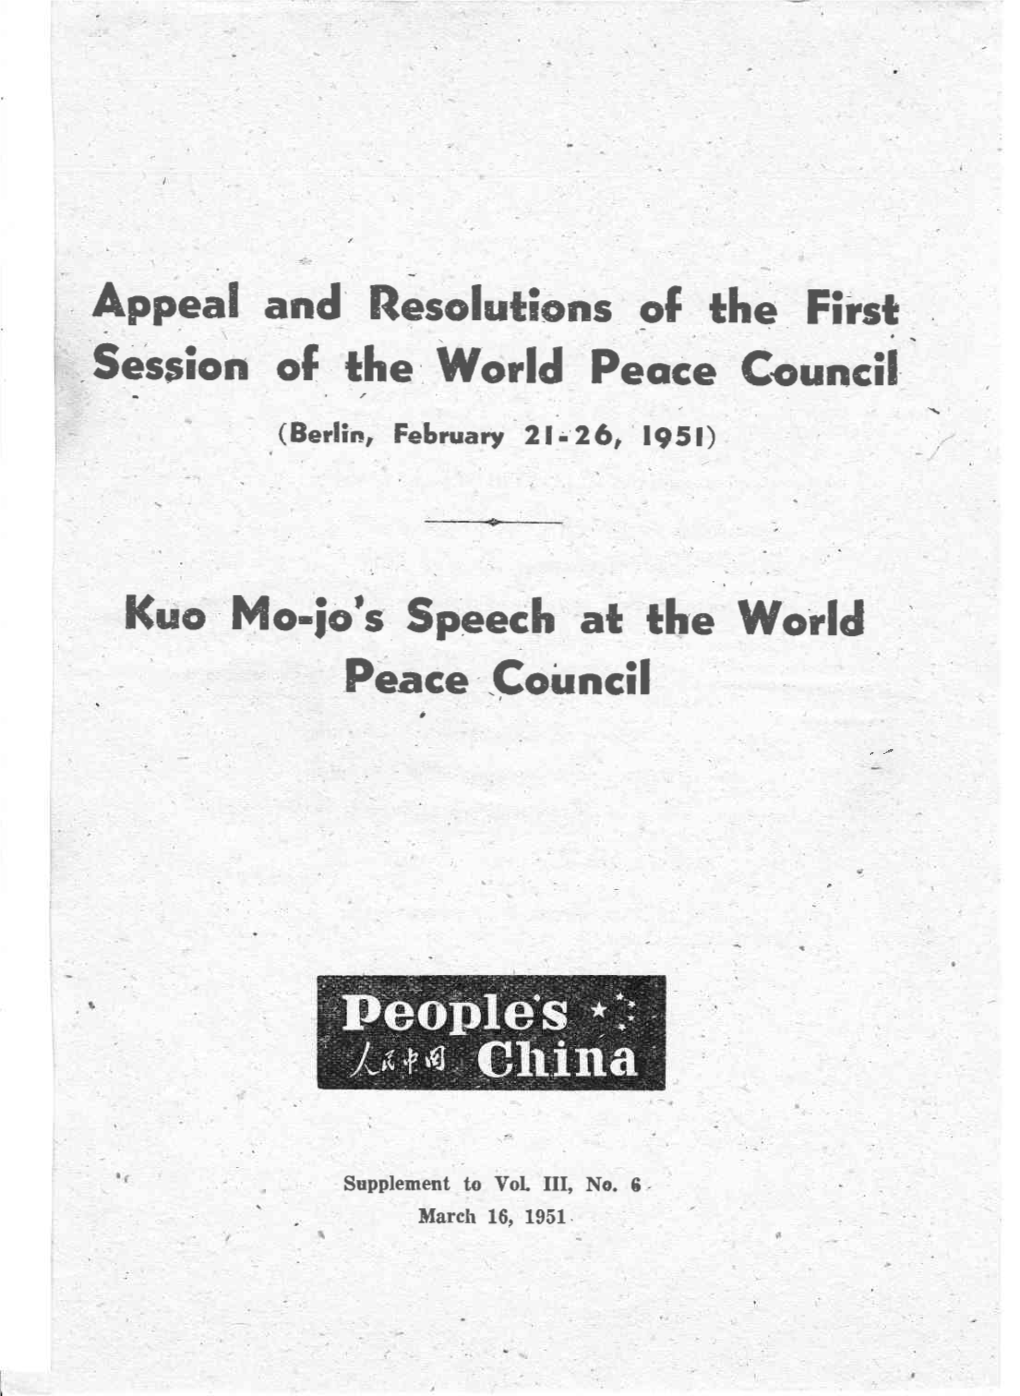 World Peace Council Resolutions and Speech by Kuo Mo-Jo